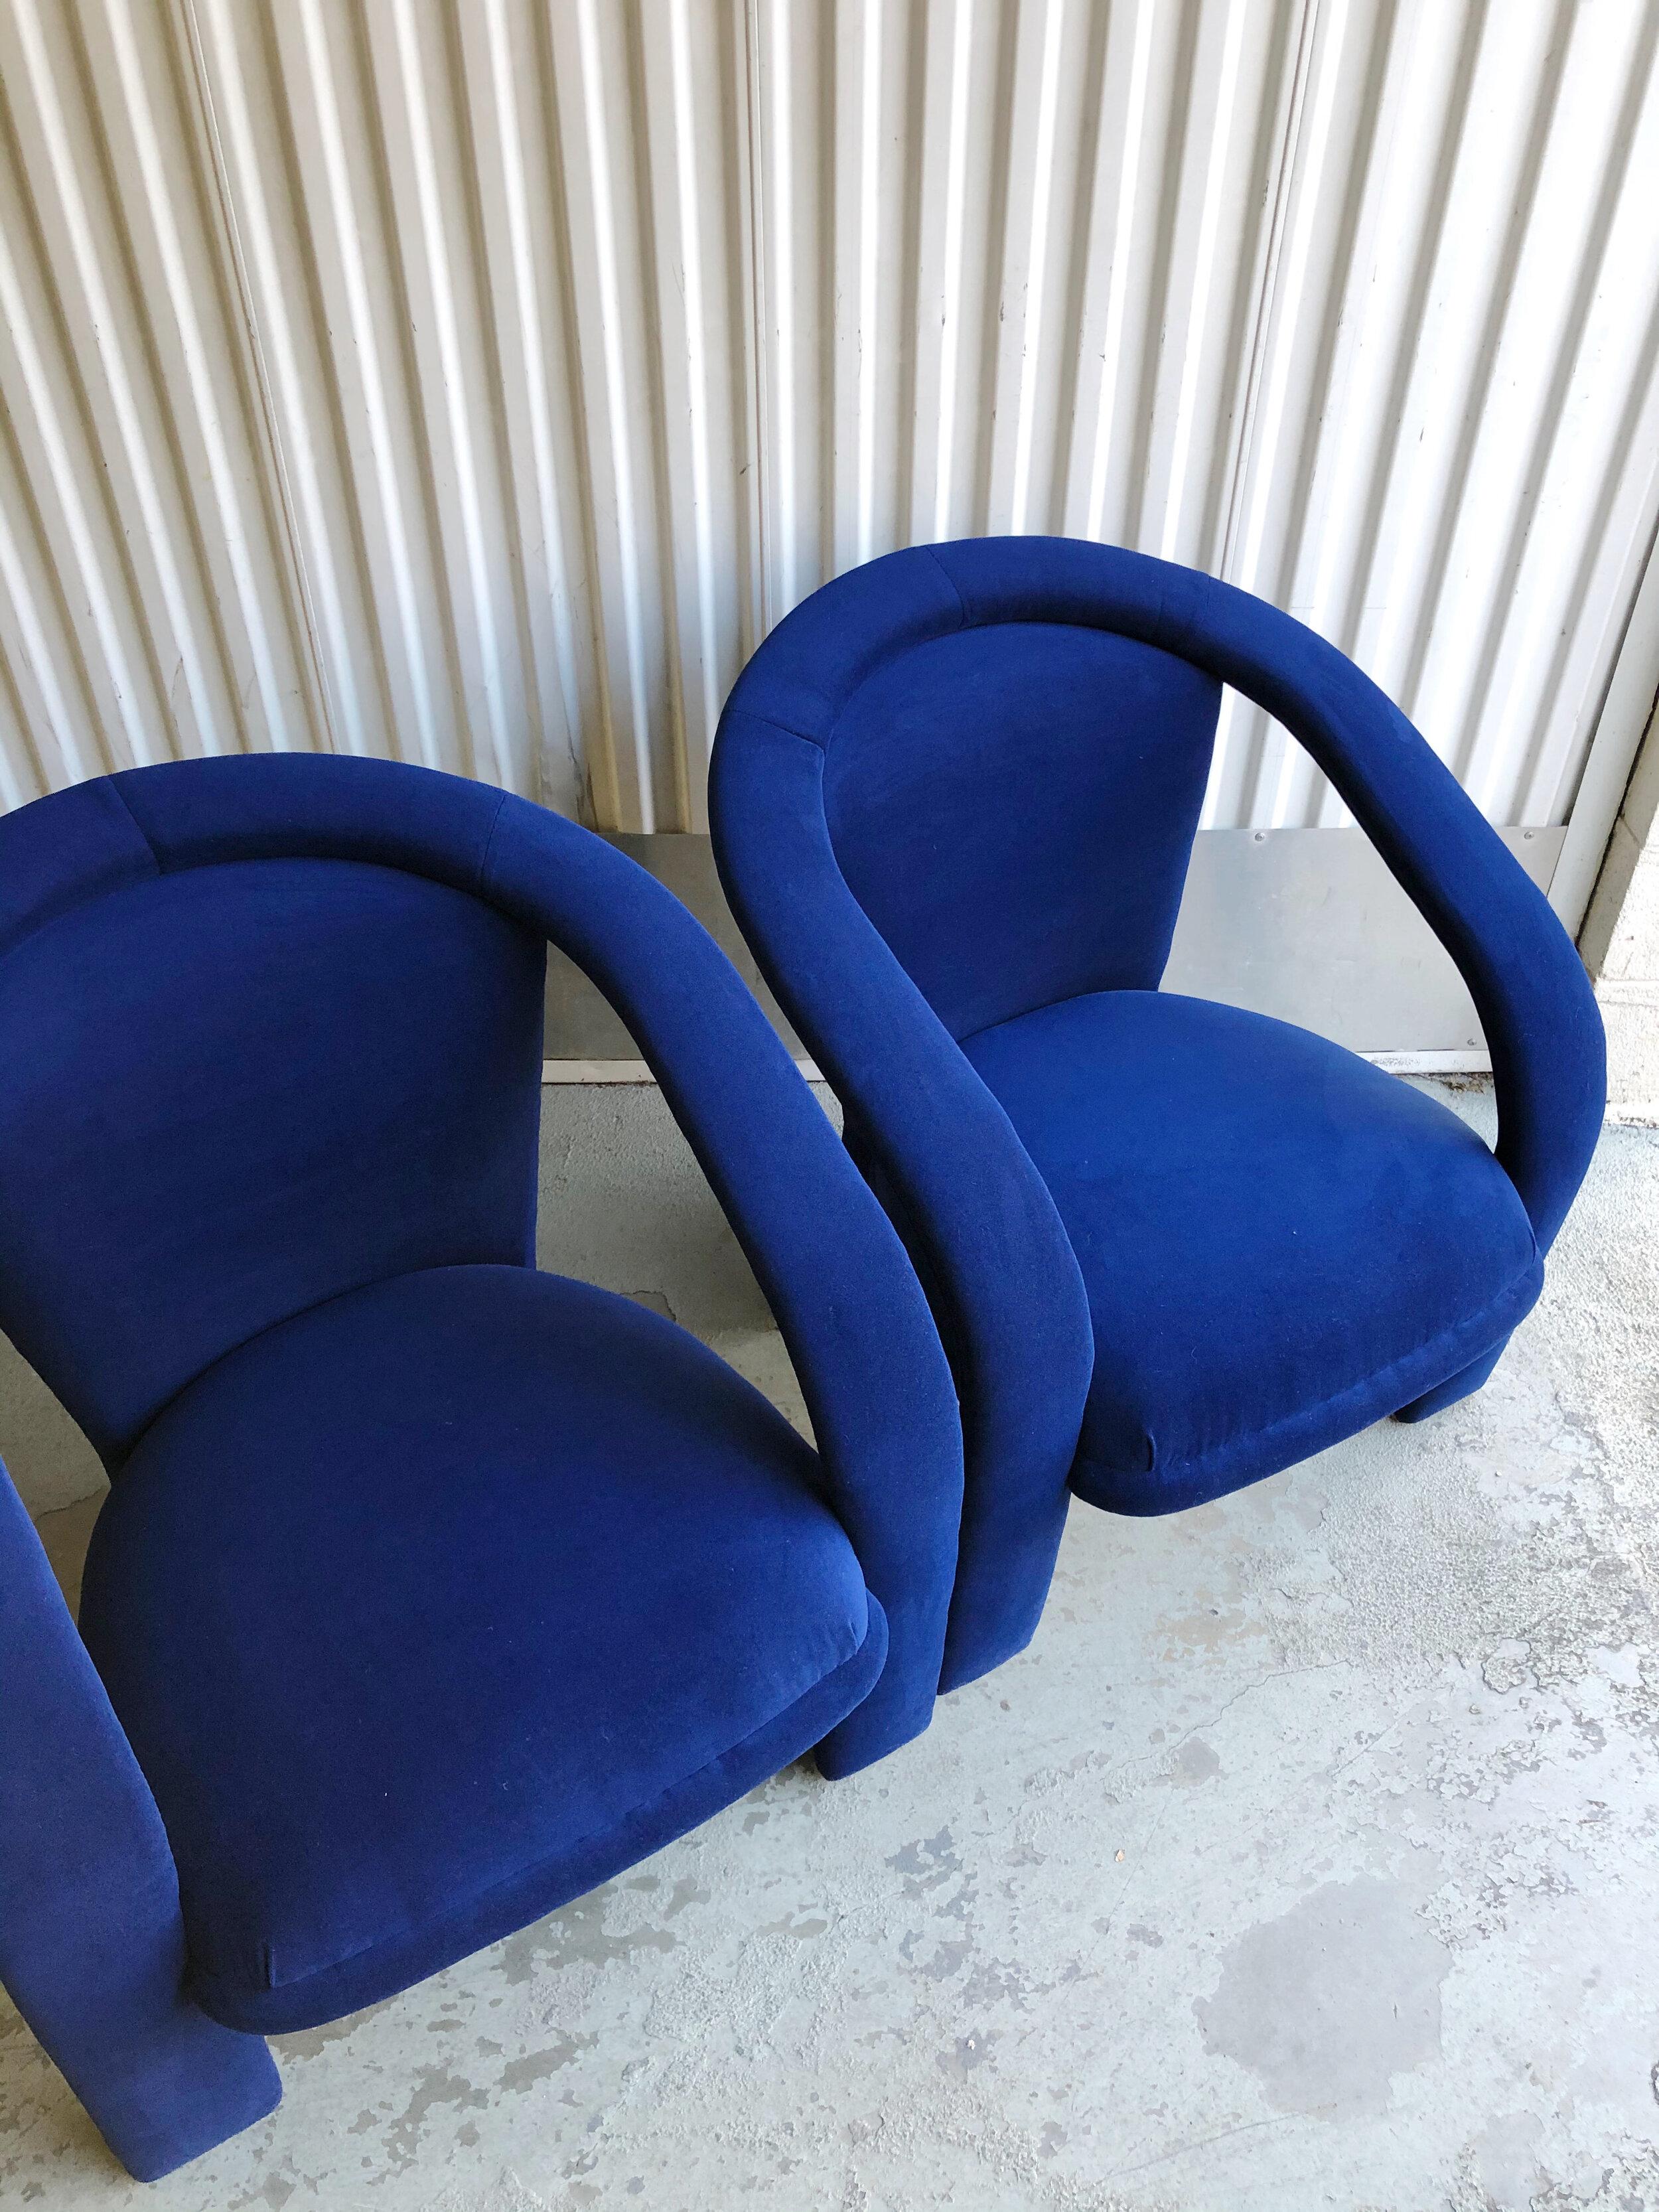 20th Century Sculptural Post Modern Armchairs After Marge Carson in New Cotton Indigo Velvet